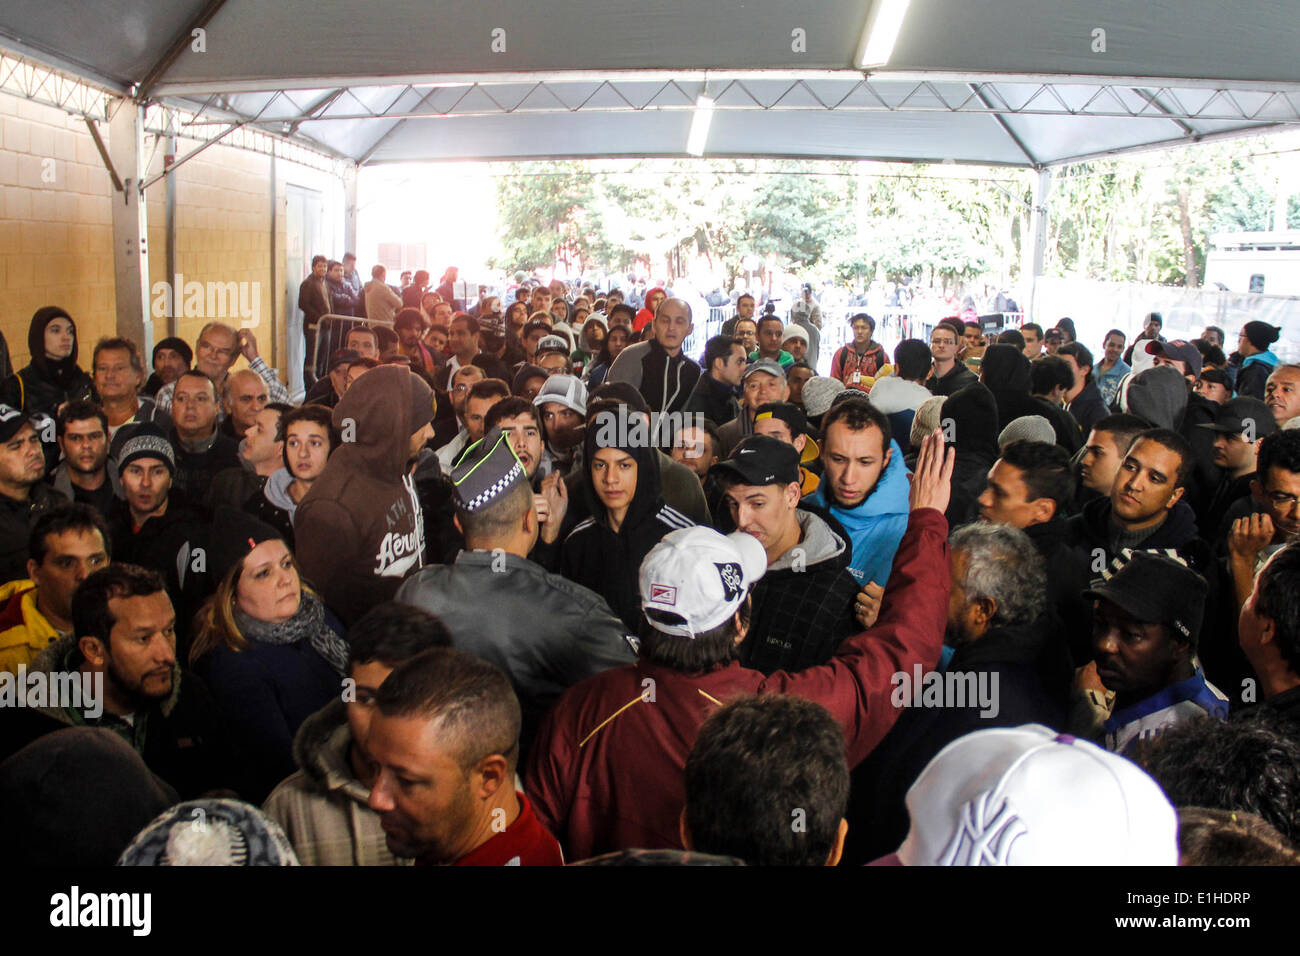 Rio De Janeiro, Brazil. 4th June, 2014. Fans gather at a ticket office of Ibaripuera Gymnasium purchasing tickets for the FIFA World Cup games in the city of Sao Paulo, Brazil, on June 4, 2014. © Marcos de Paula/AGENCIA ESTADO/Xinhua/Alamy Live News Stock Photo